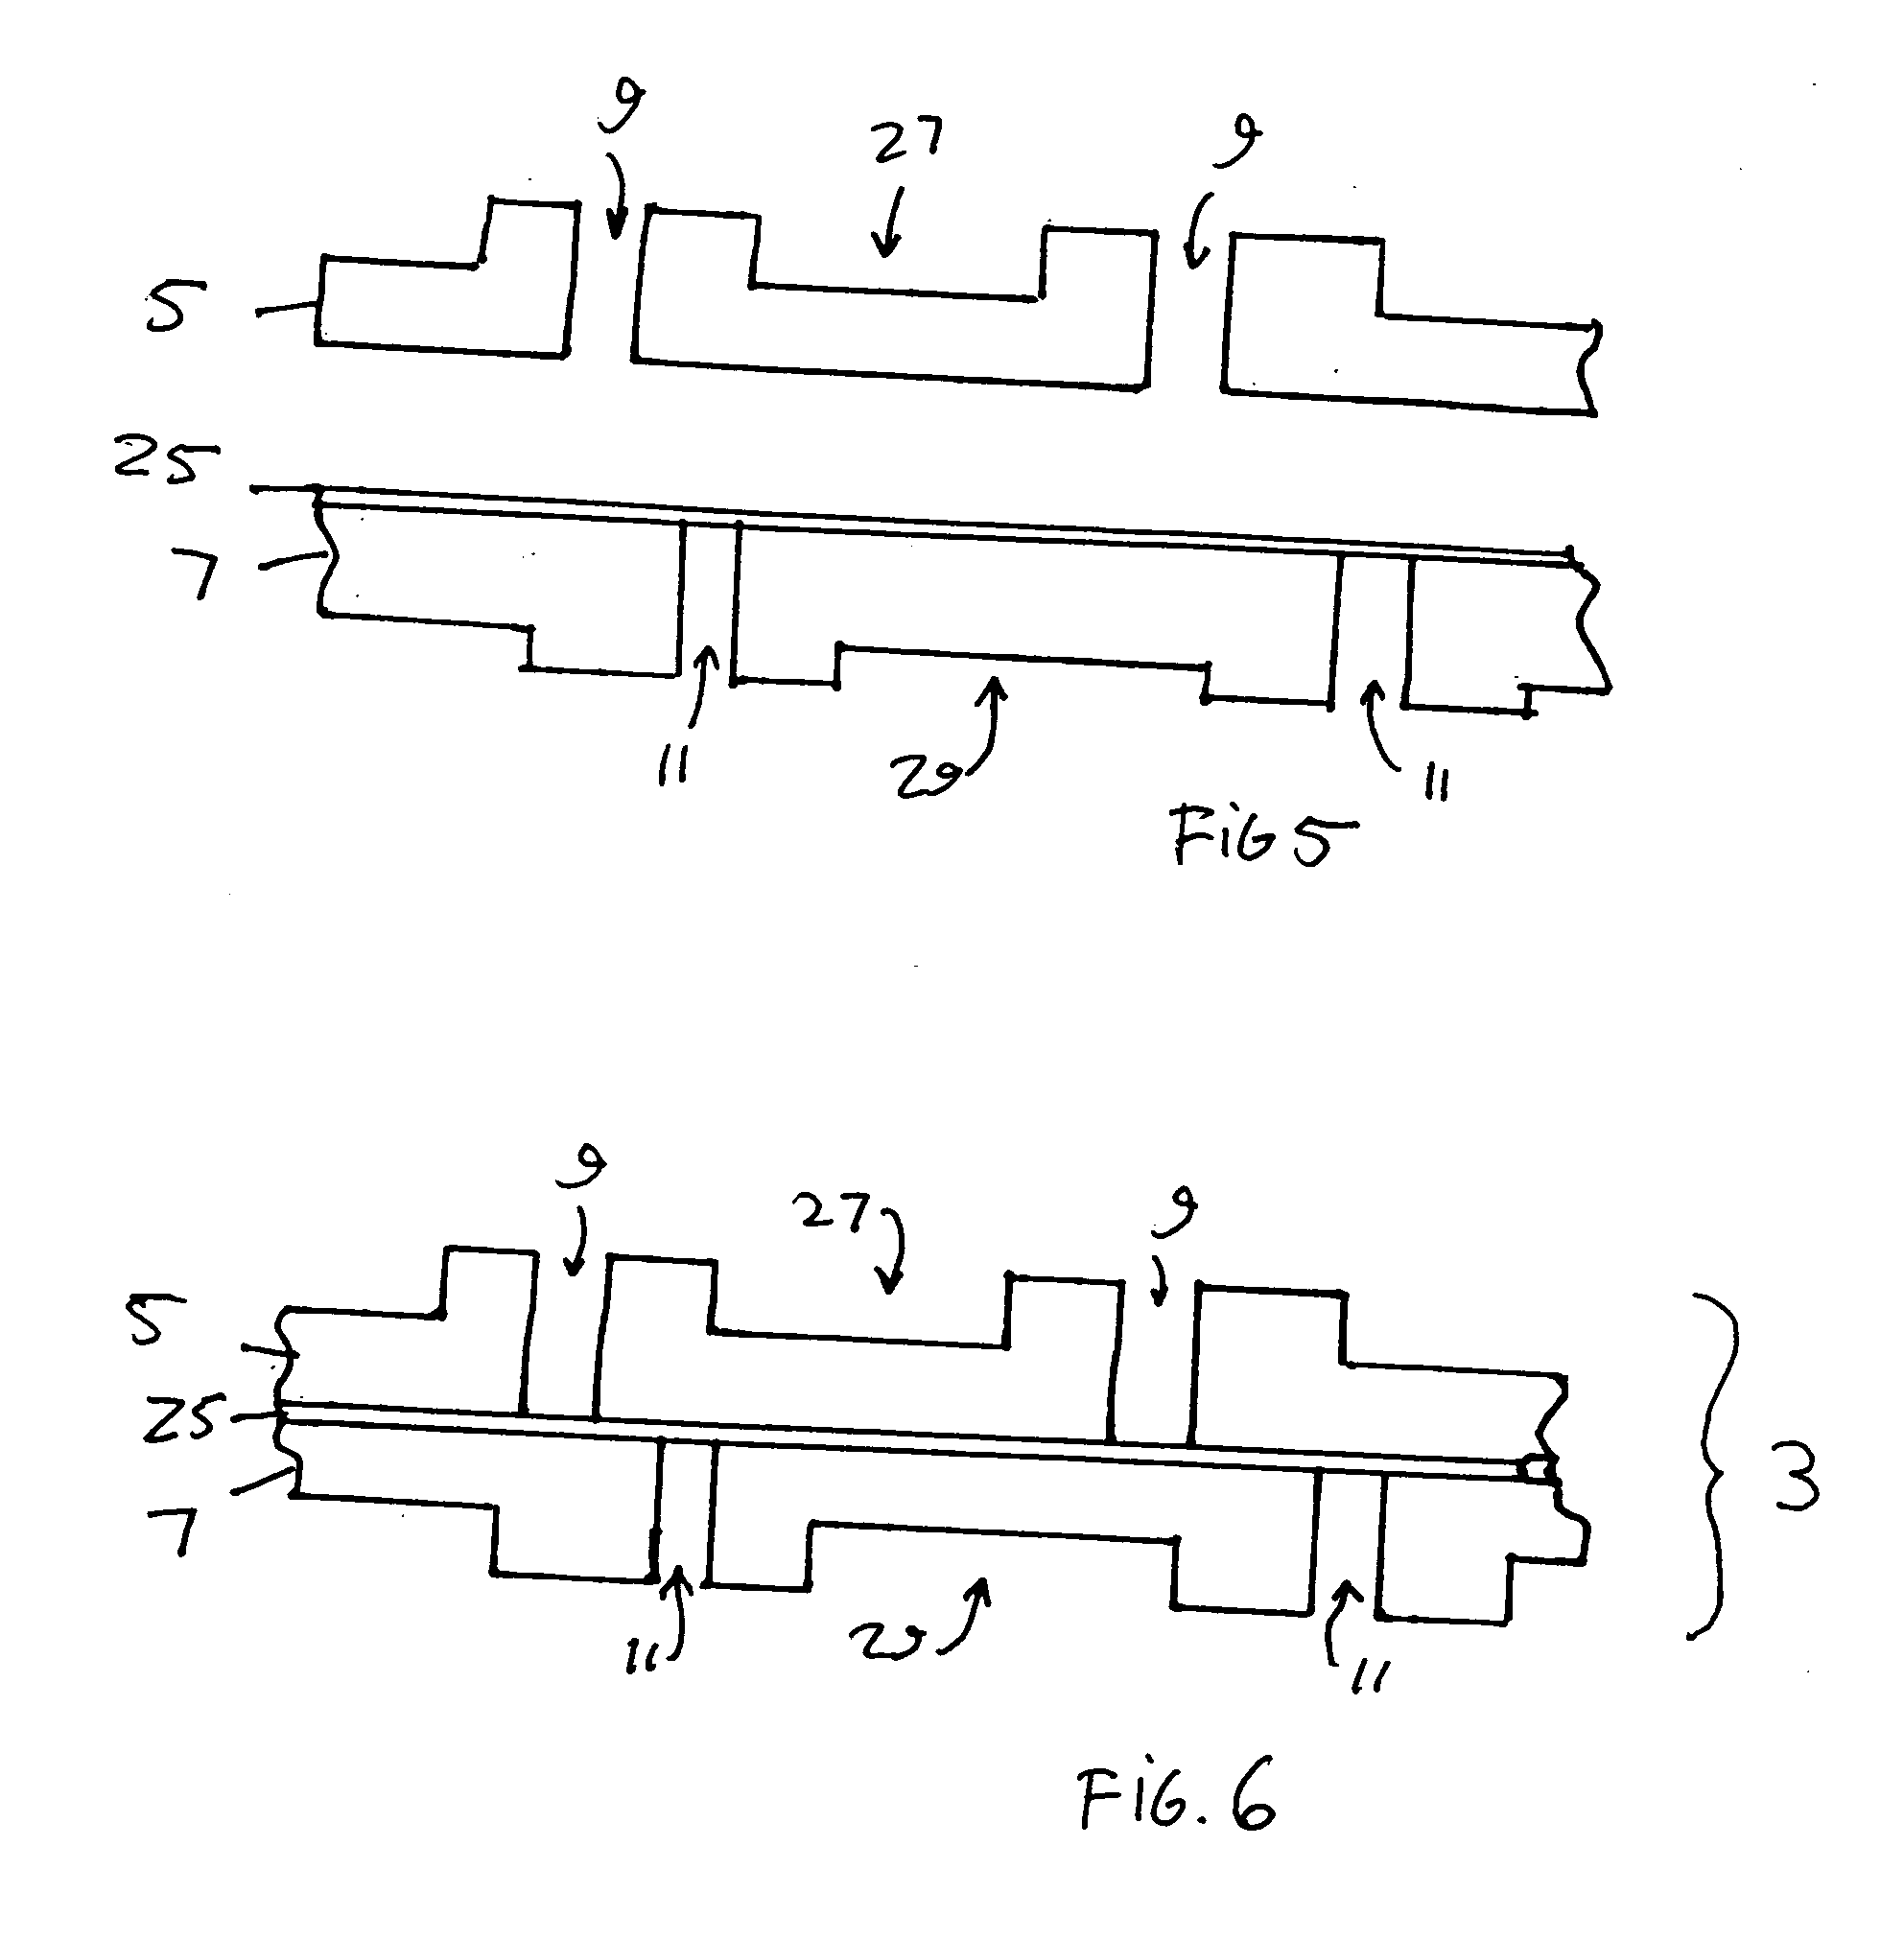 Offset interconnect for a solid oxide fuel cell and method of making same